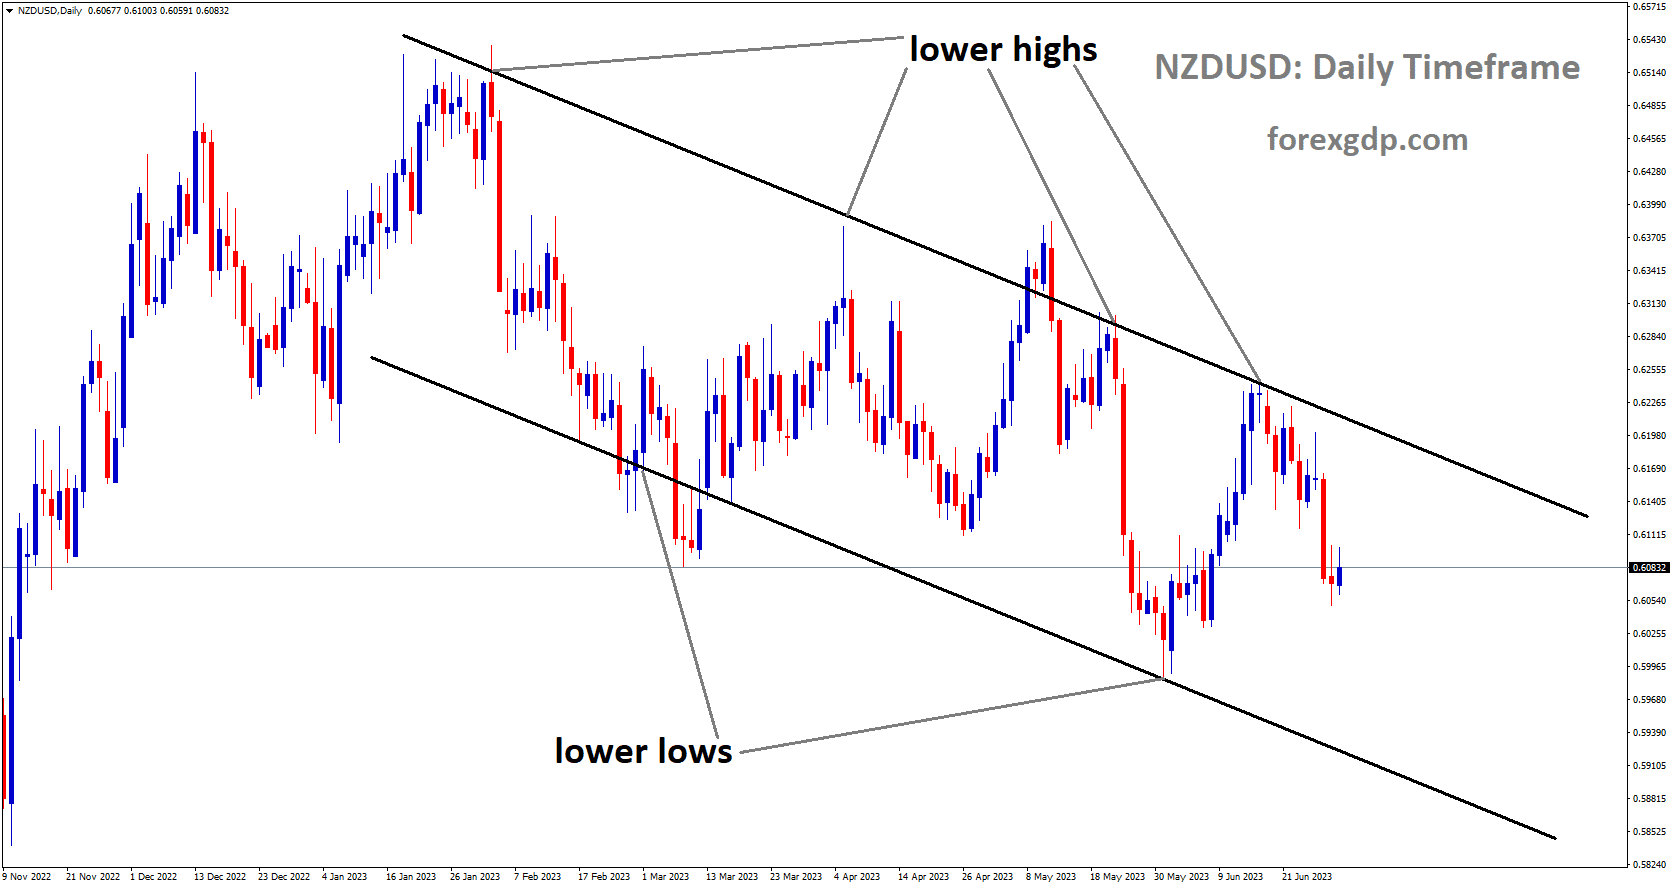 NZDUSD is moving in Descending channel and the market has fallen from lower high area of the channel.